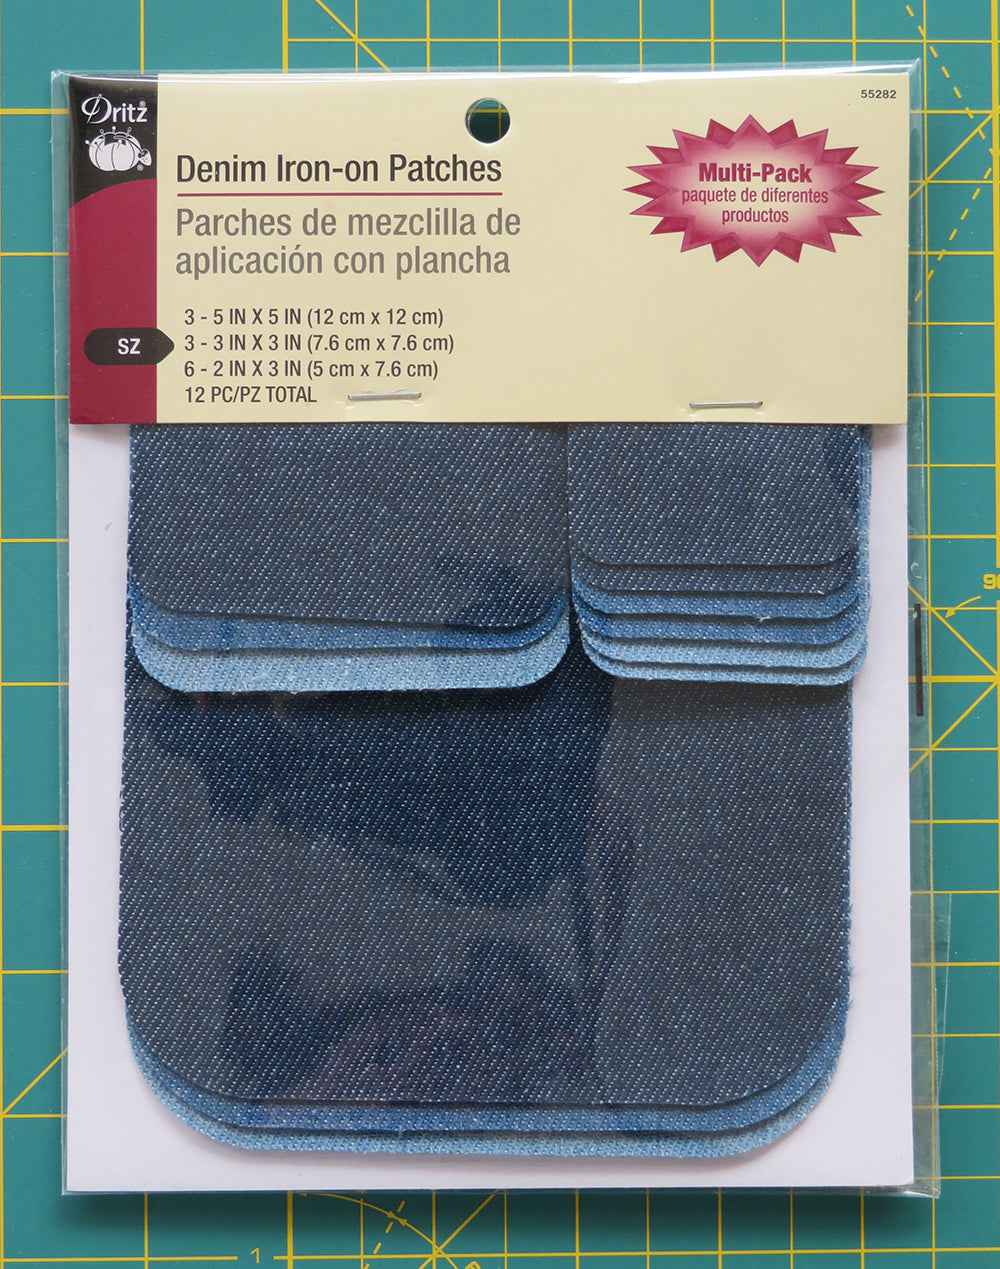 Our 12 Pack Denim Iron-on Patches